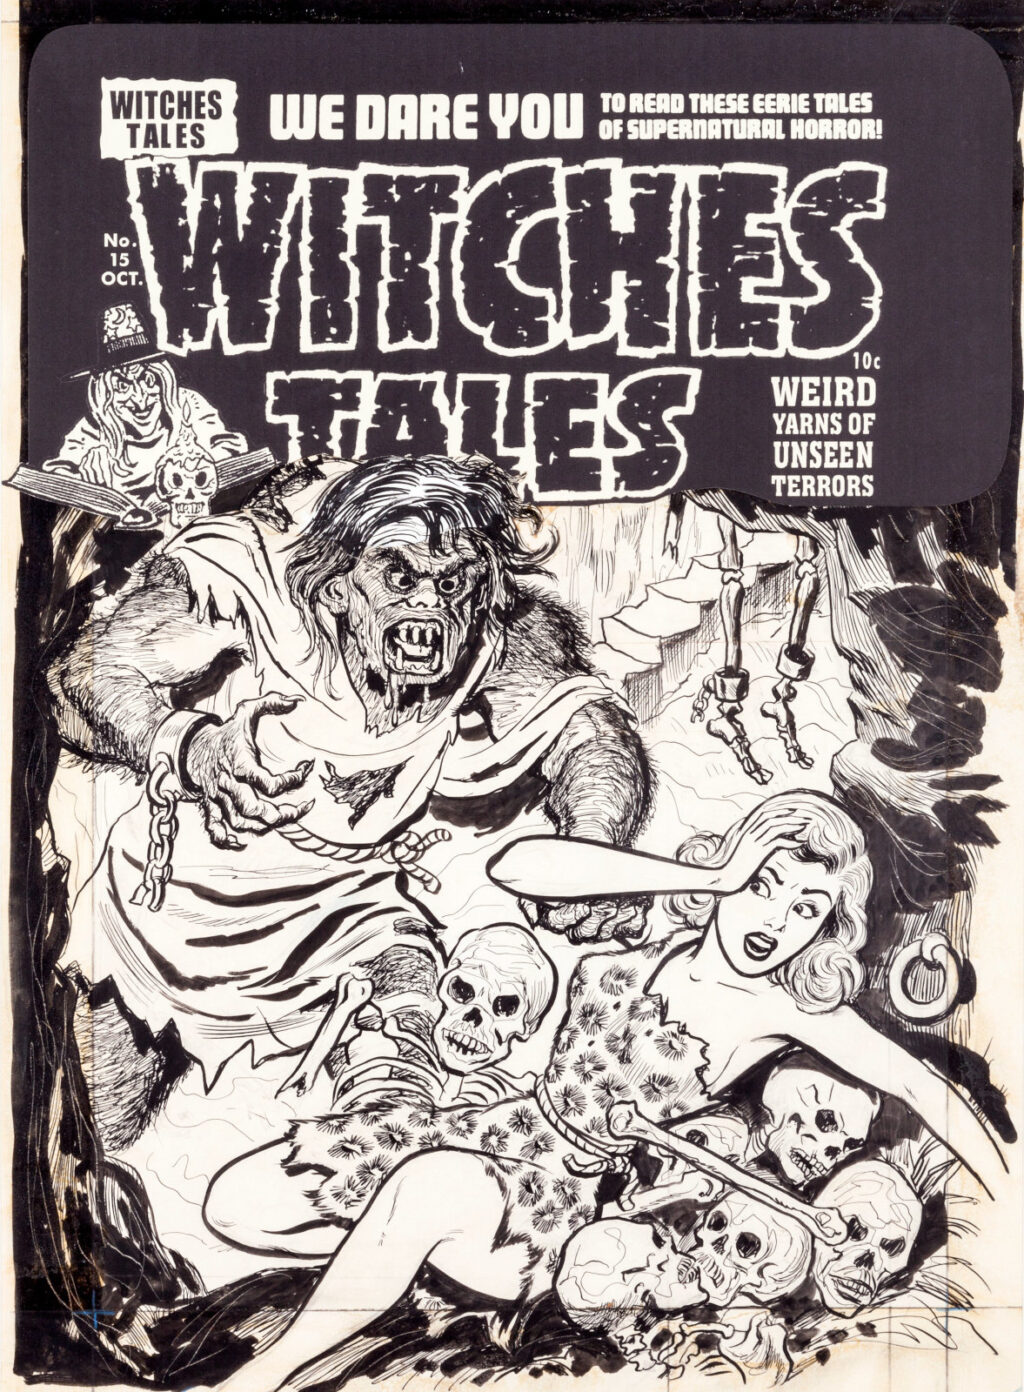 Witches Tales issue 15 cover by Joe Simon